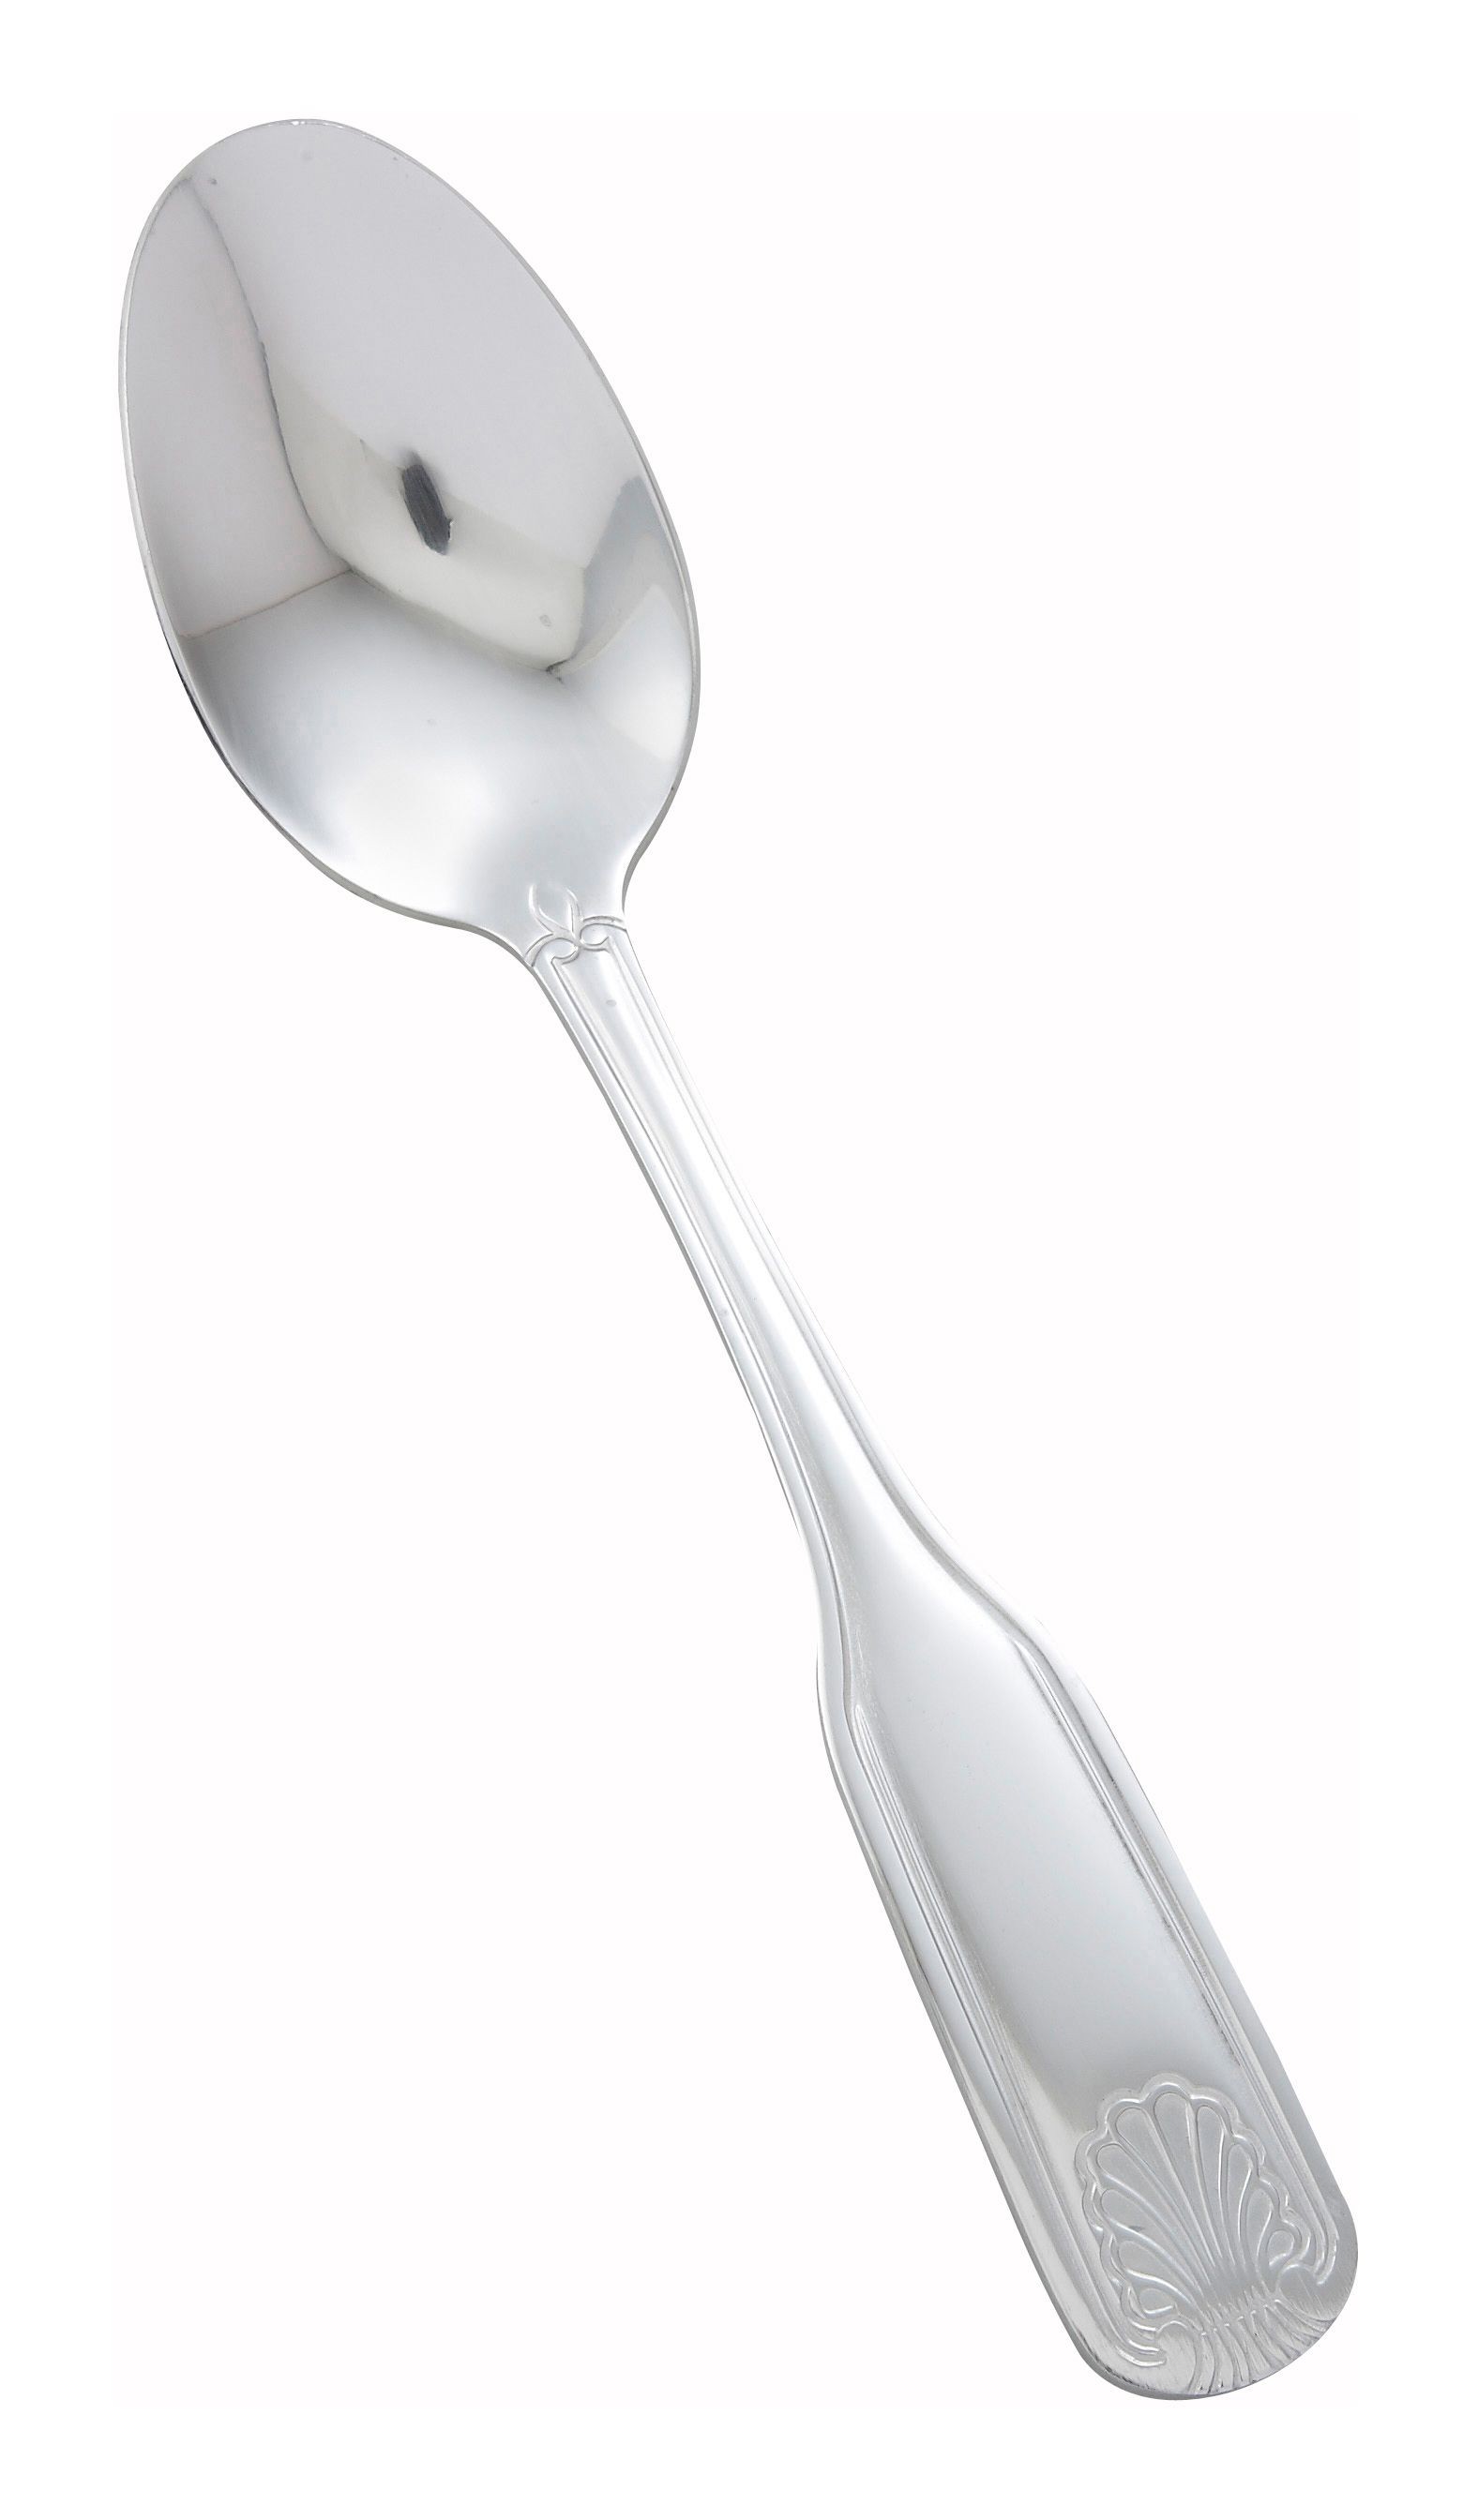 Winco 0006-03 Toulouse Heavy Mirror Finish Stainless Steel Dinner Spoon (12/Pack)